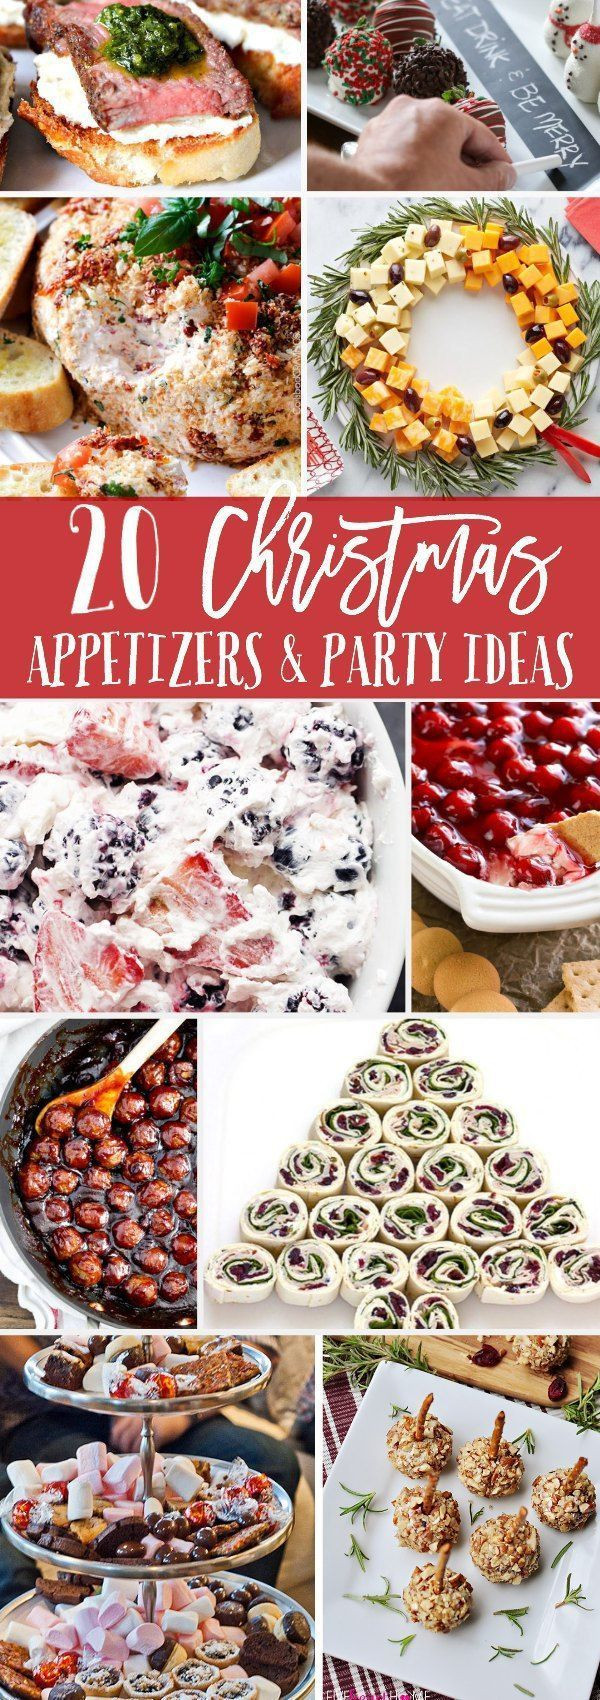 Appetizers For Christmas Eve Party
 Top 25 best Christmas party appetizers ideas on Pinterest